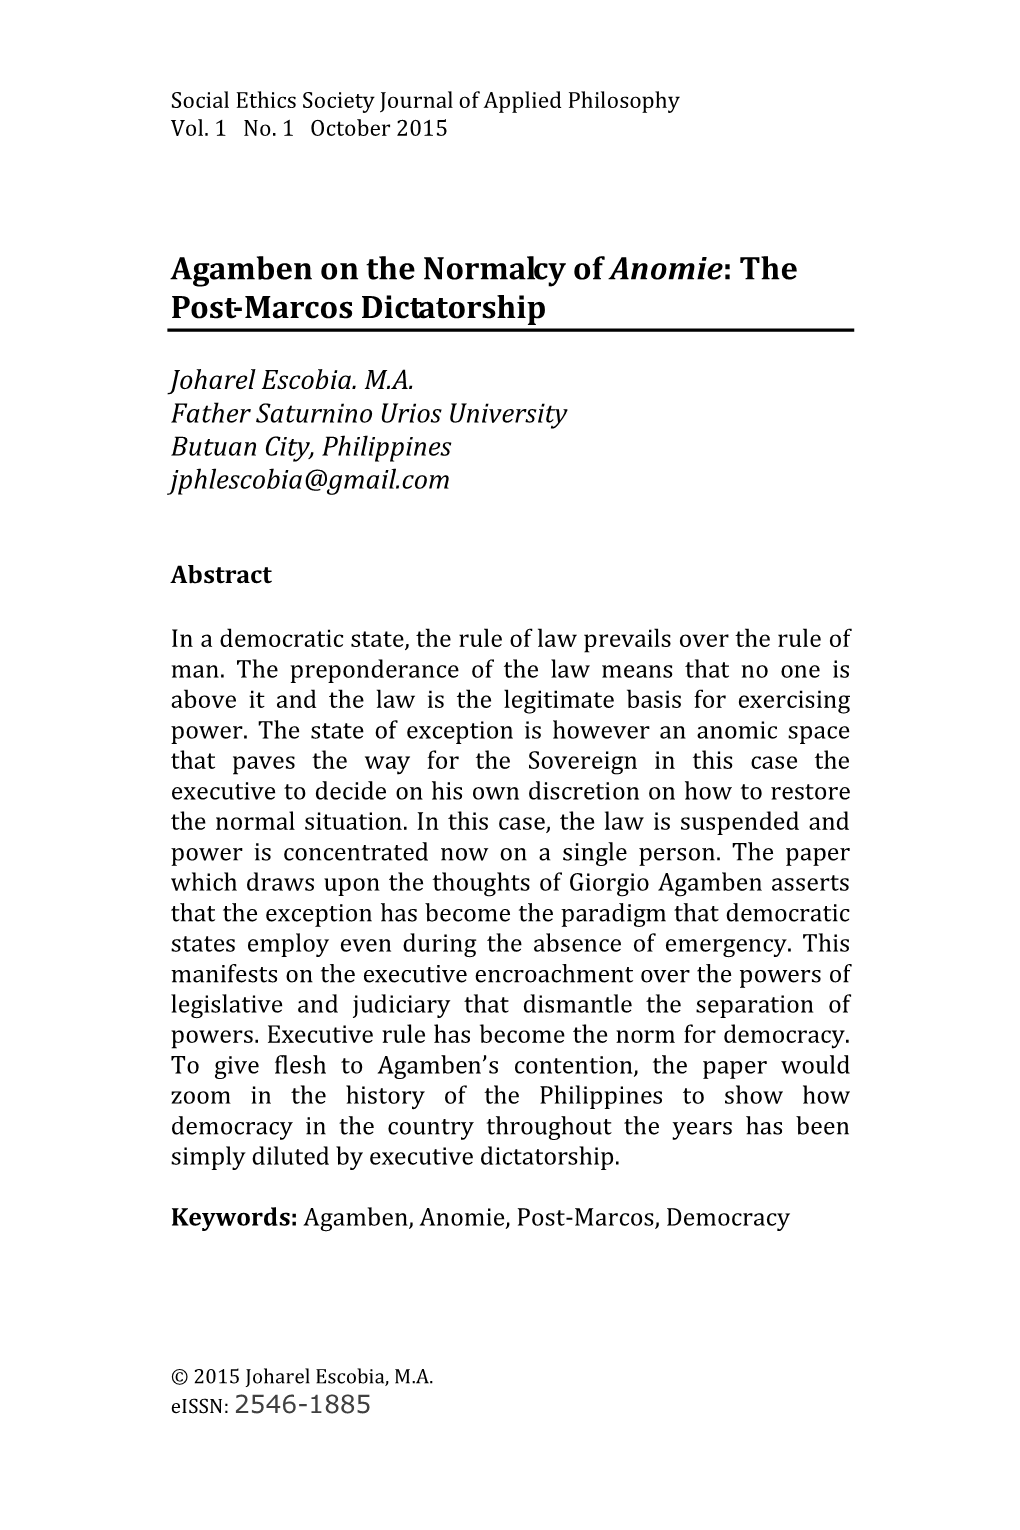 Agamben on the Normalcy of Anomie: the Post-Marcos Dictatorship